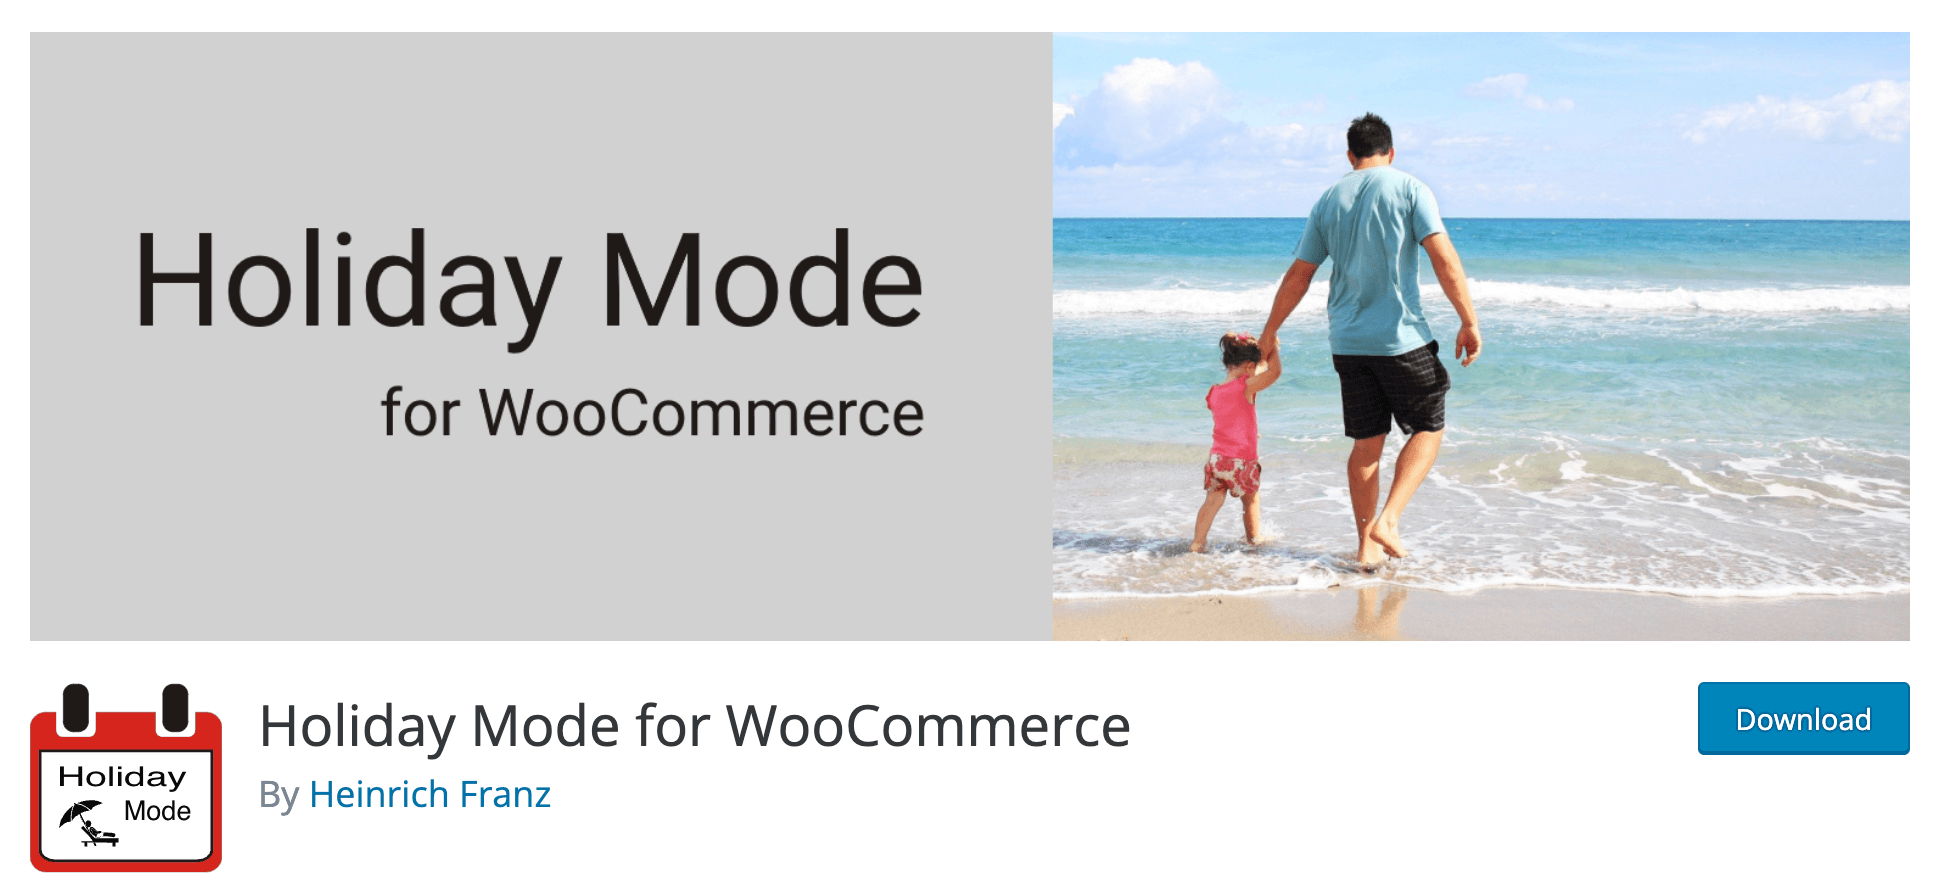 Holiday Mode for WooCommerce